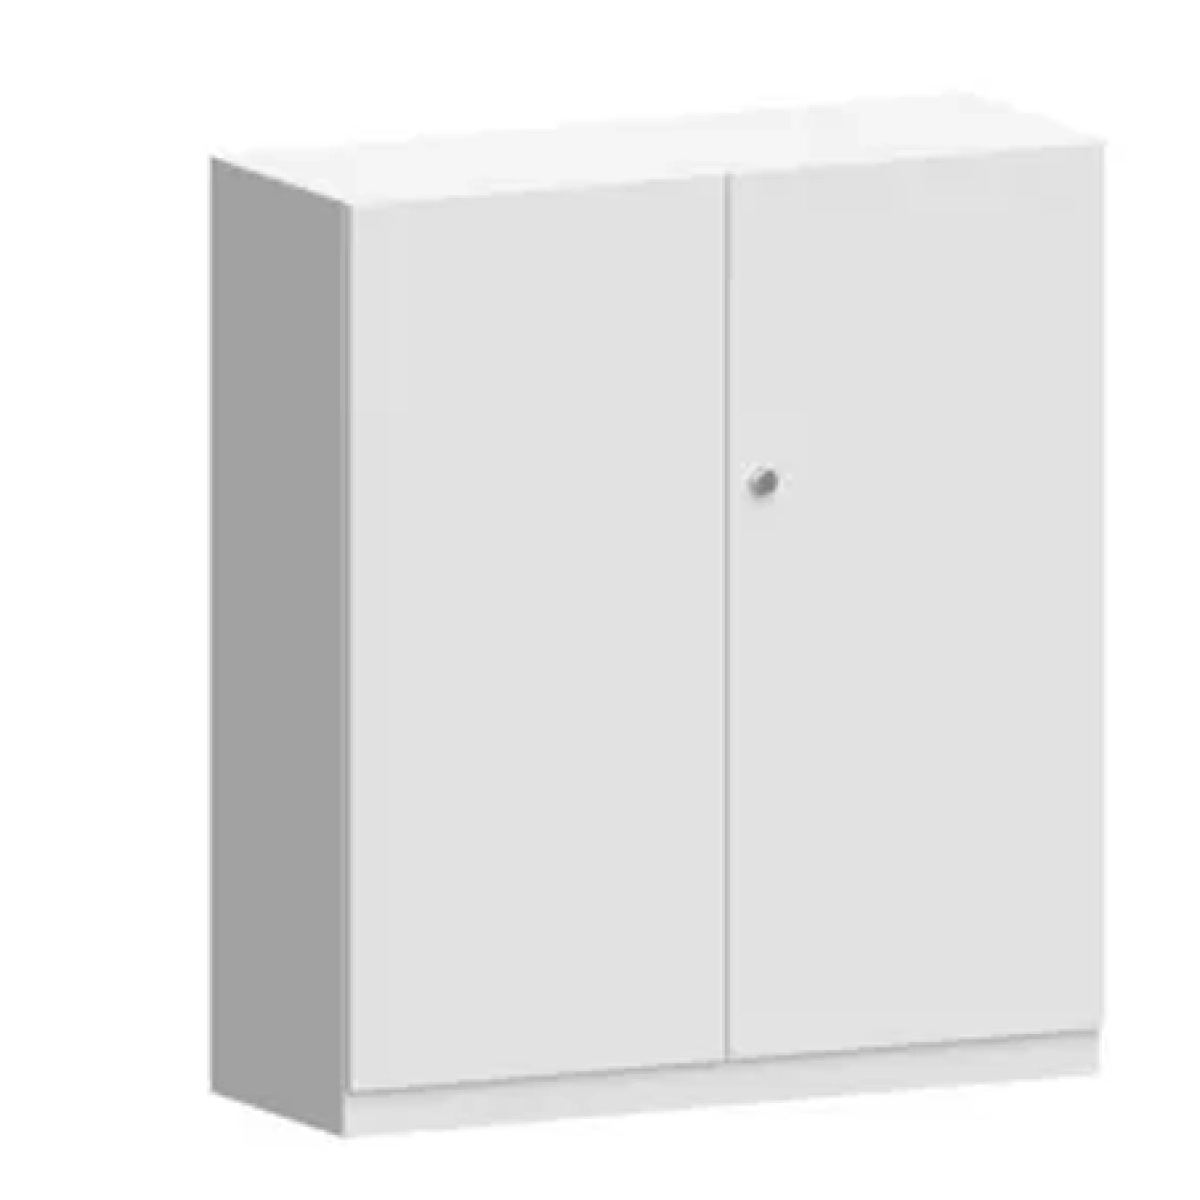 ESD side cabinets and shelves